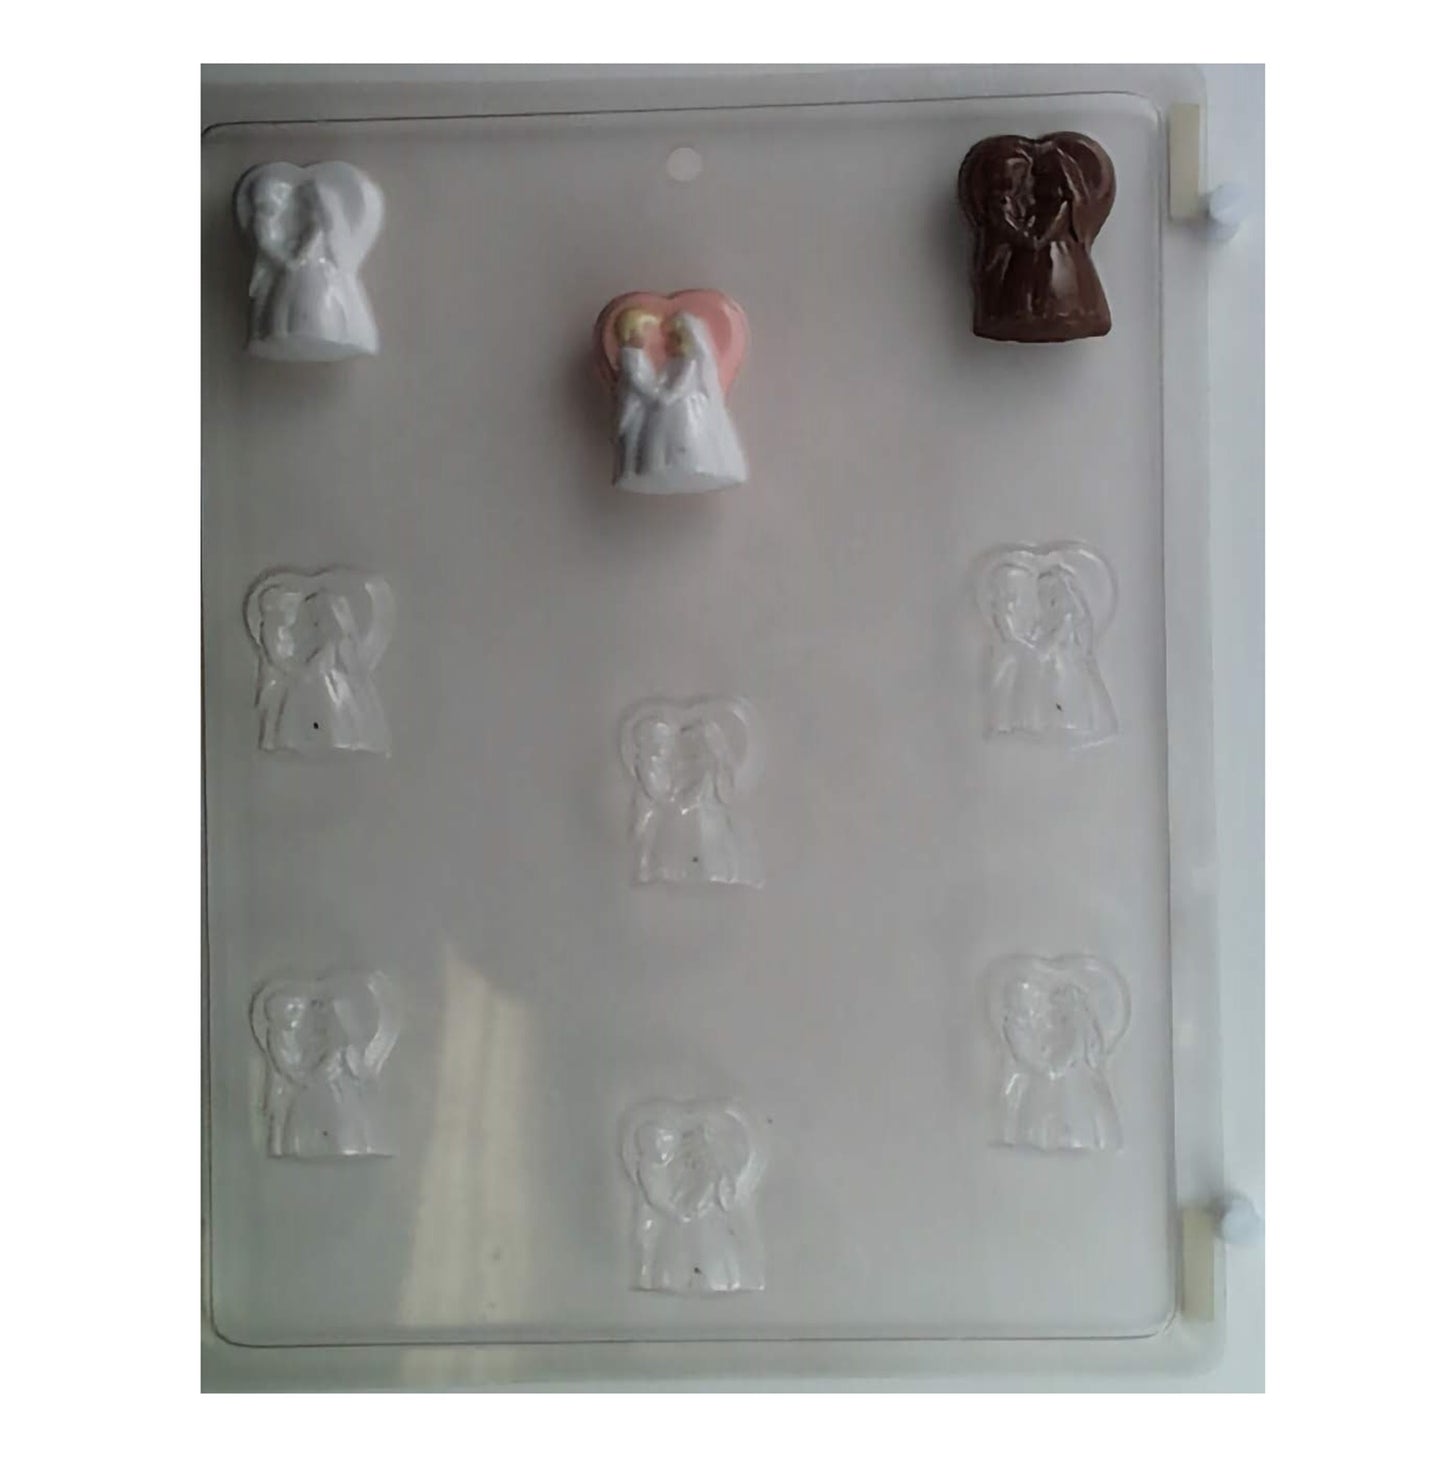 Chocolate mold sheet with multiple small cavities shaped as brides and grooms, perfect for wedding-themed candies or cake decorations.